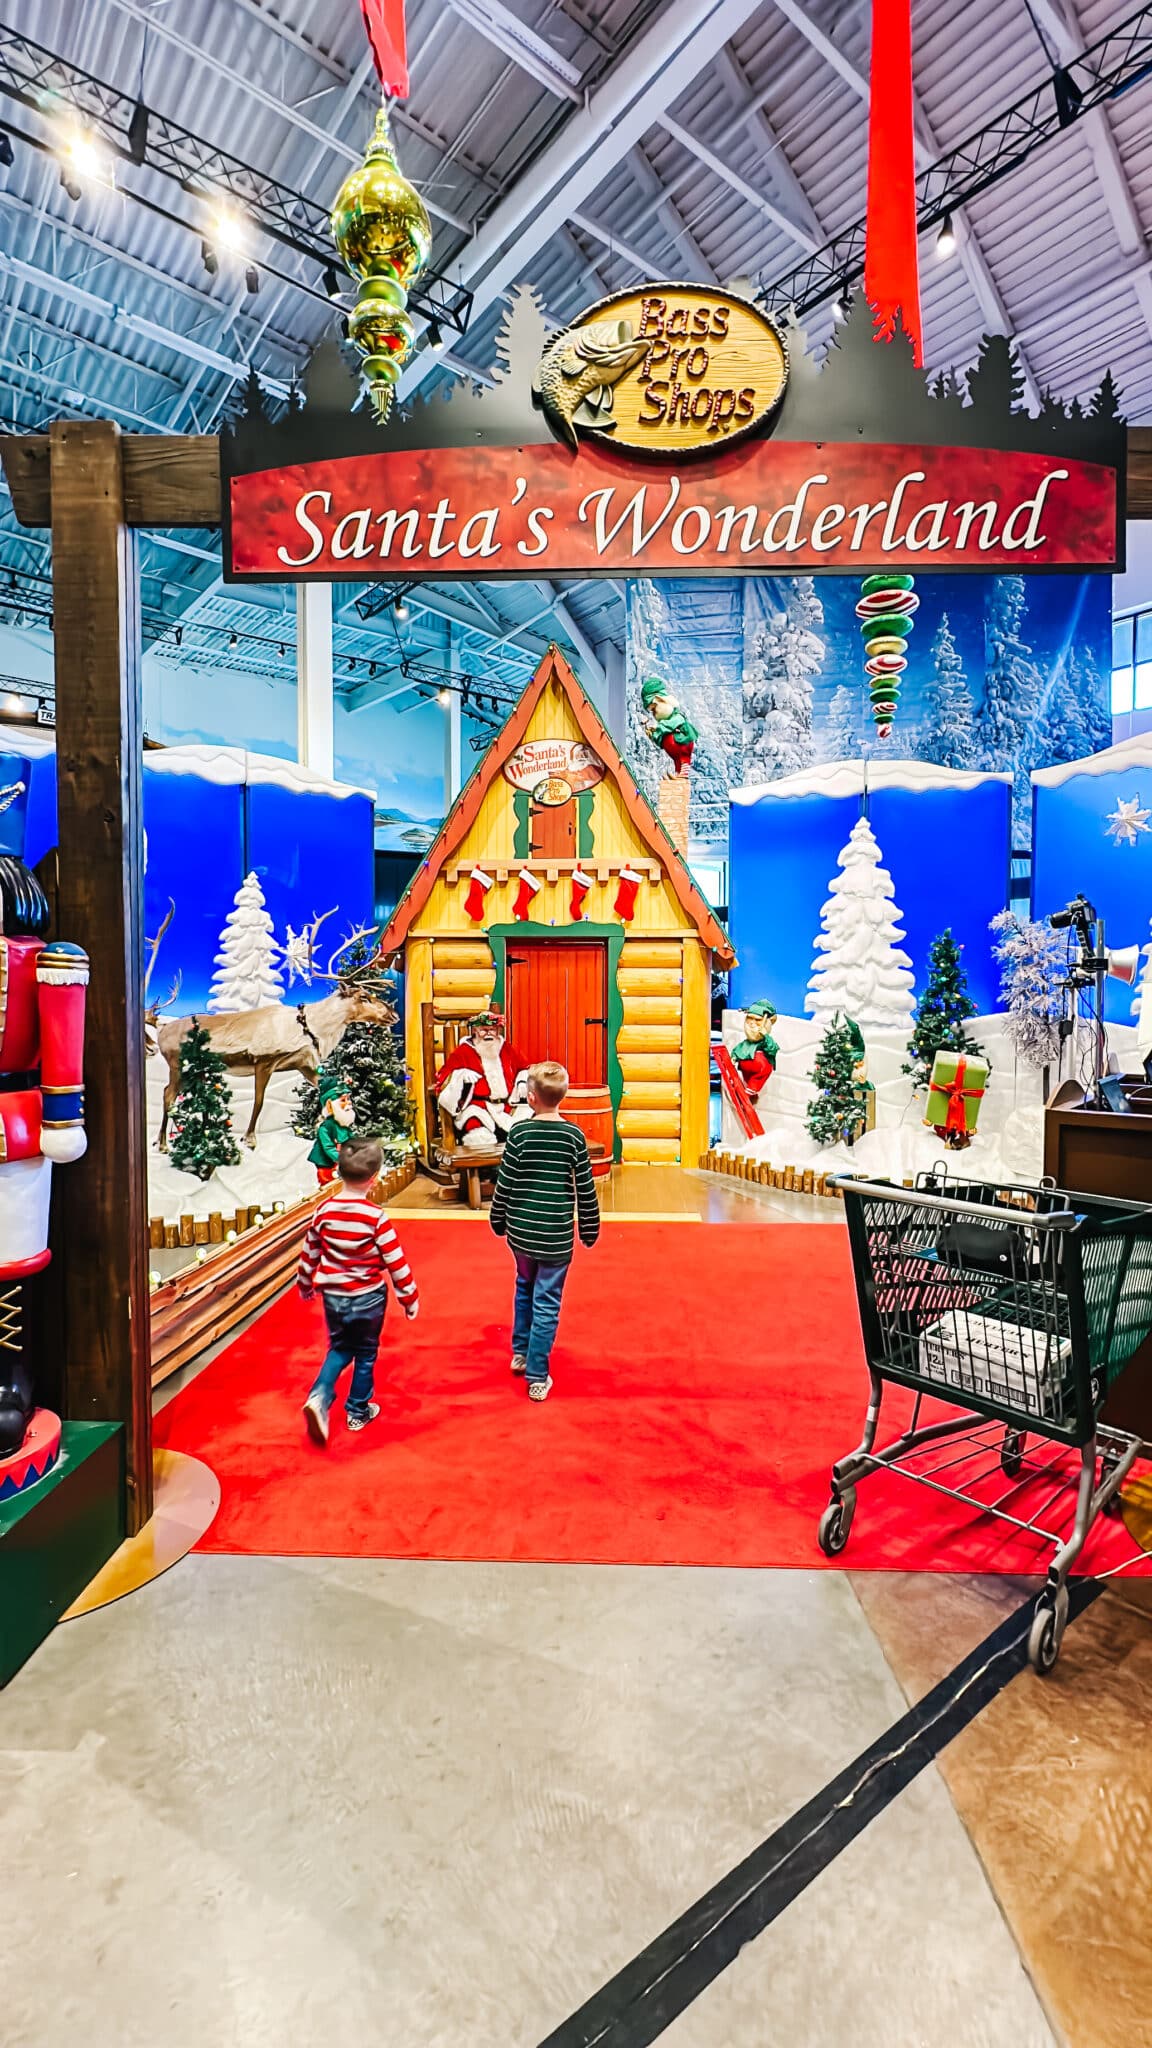 Bass Pro Shop Santa: How to Get Free Santa Pictures